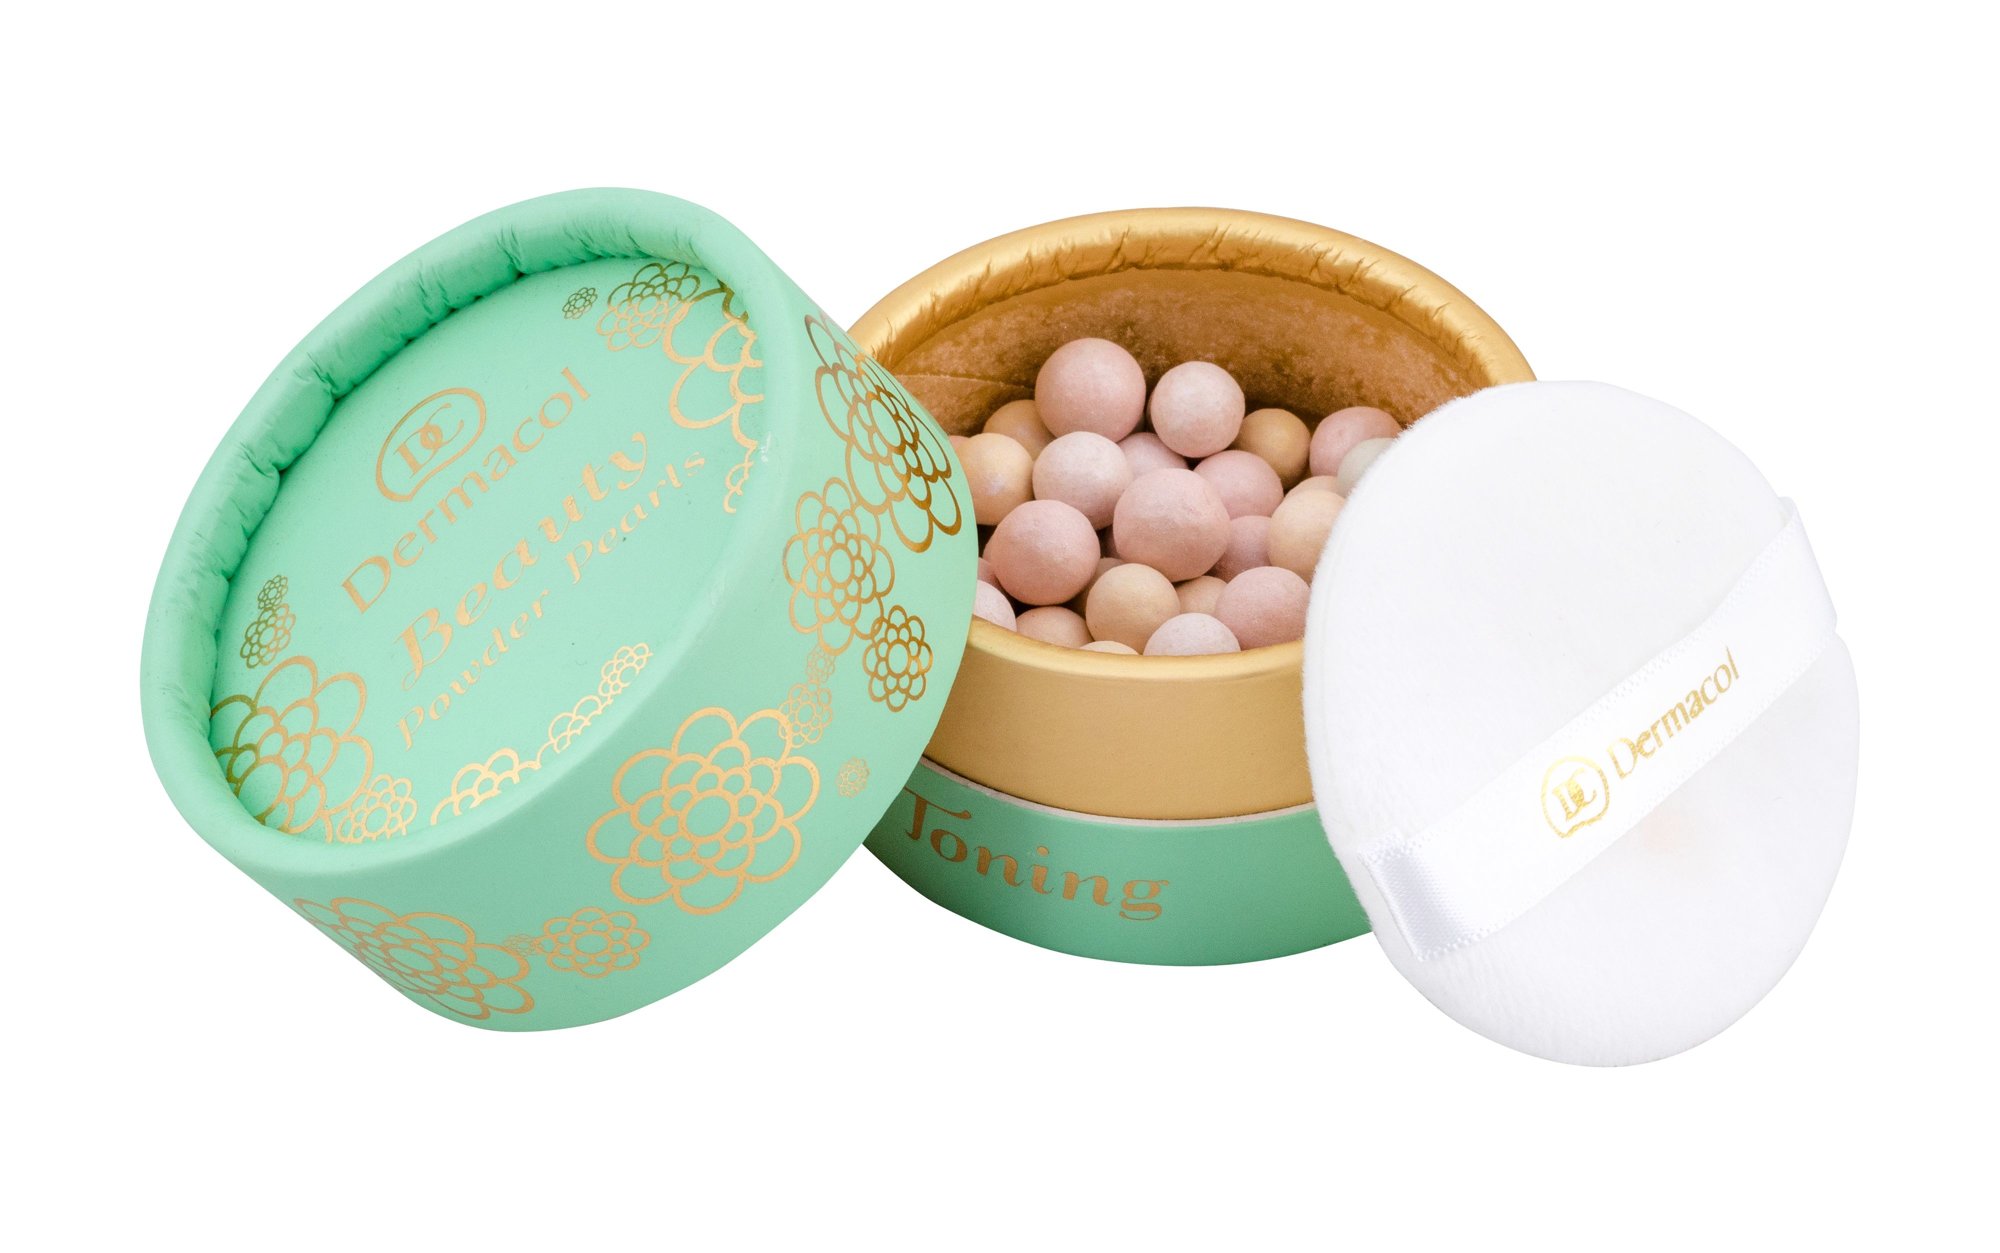 Dermacol Beauty Powder Pearls sausa pudra